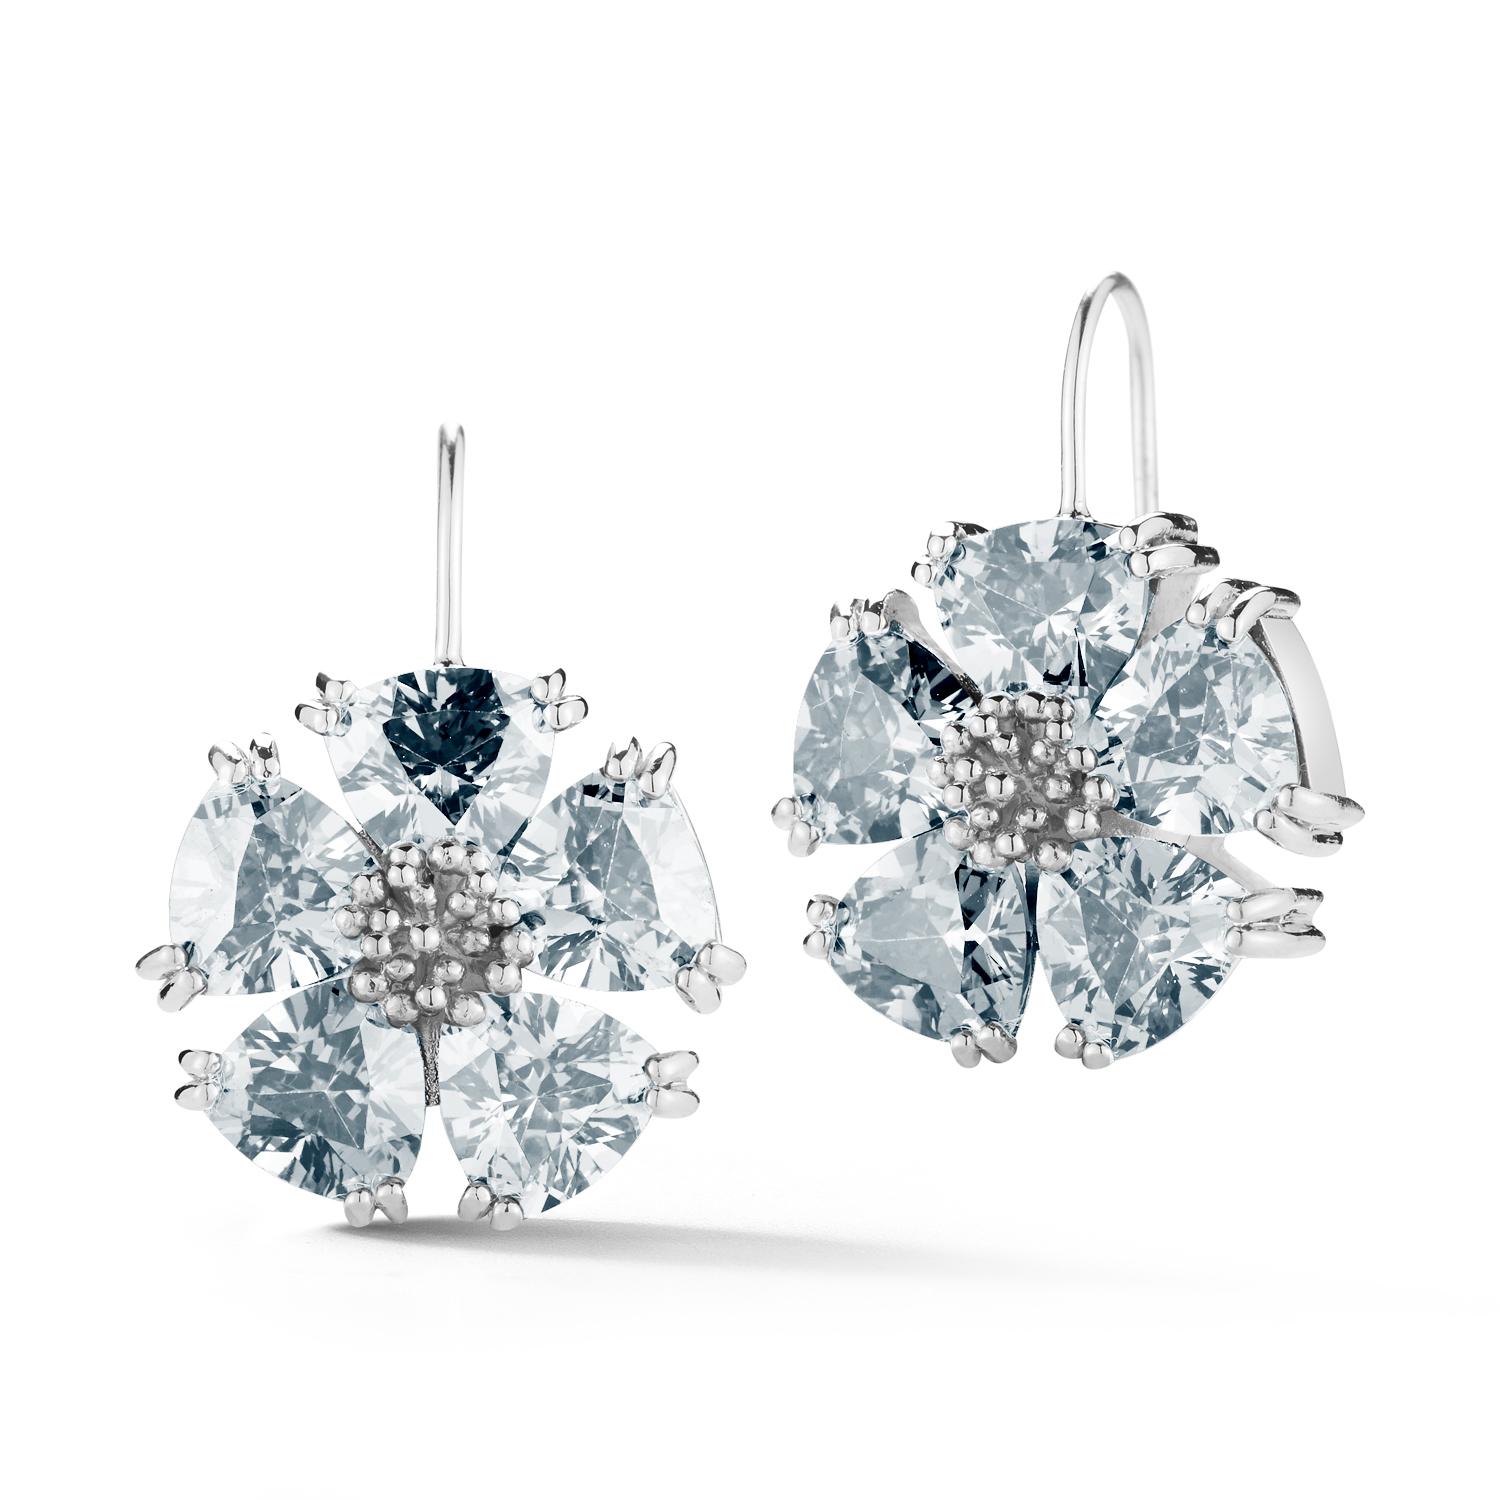 Designed in NYC

.925 Sterling Silver 10 x 7mm White Topaz Blossom Stone Wire Drop Earrings. No matter the season, allow natural beauty to surround you wherever you go. Blossom stone wire drop earrings: 

Sterling silver 
High-polish